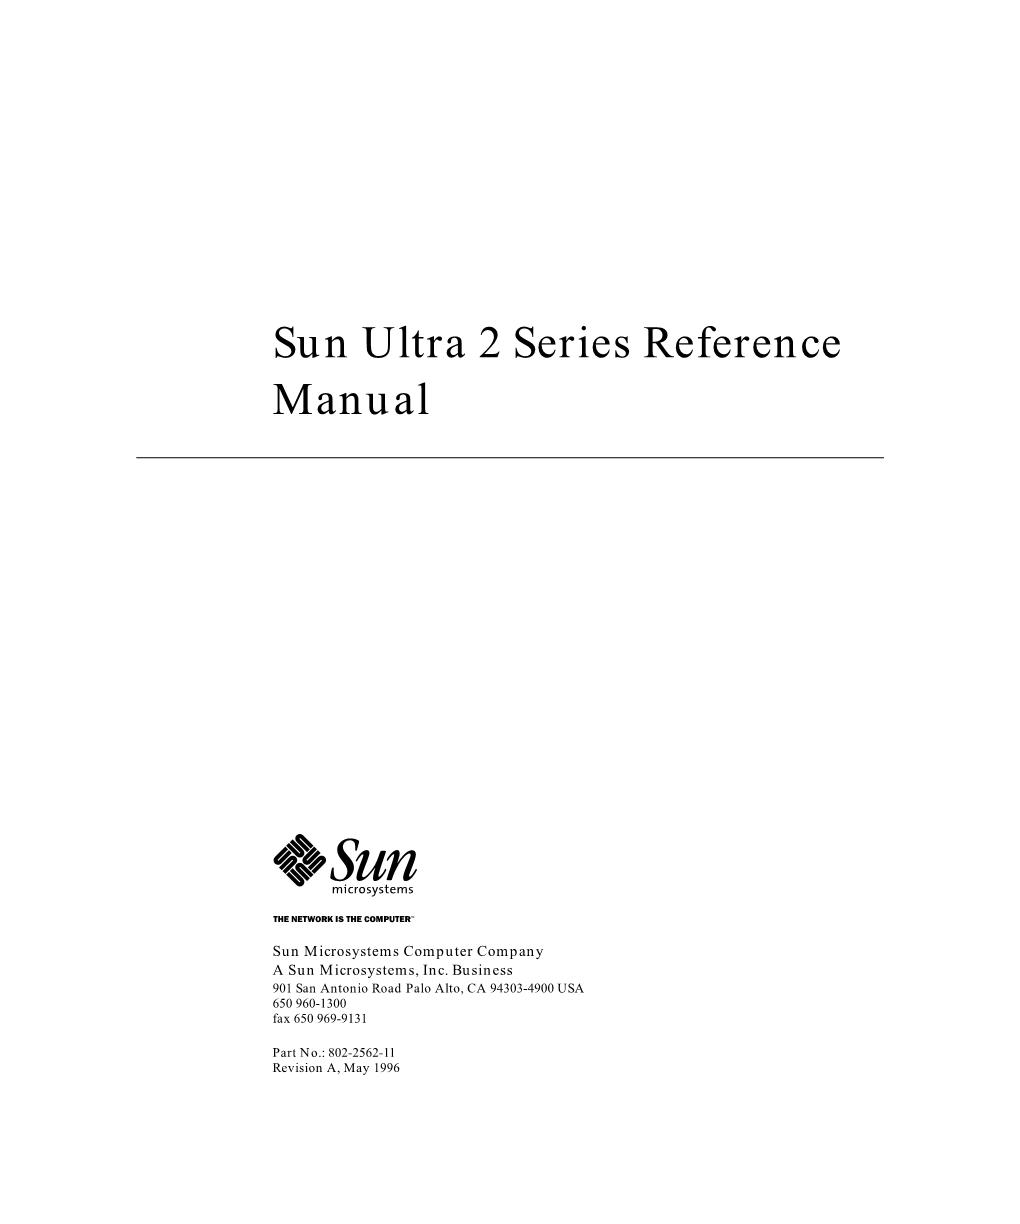 Sun Ultra 2 Series Reference Manual